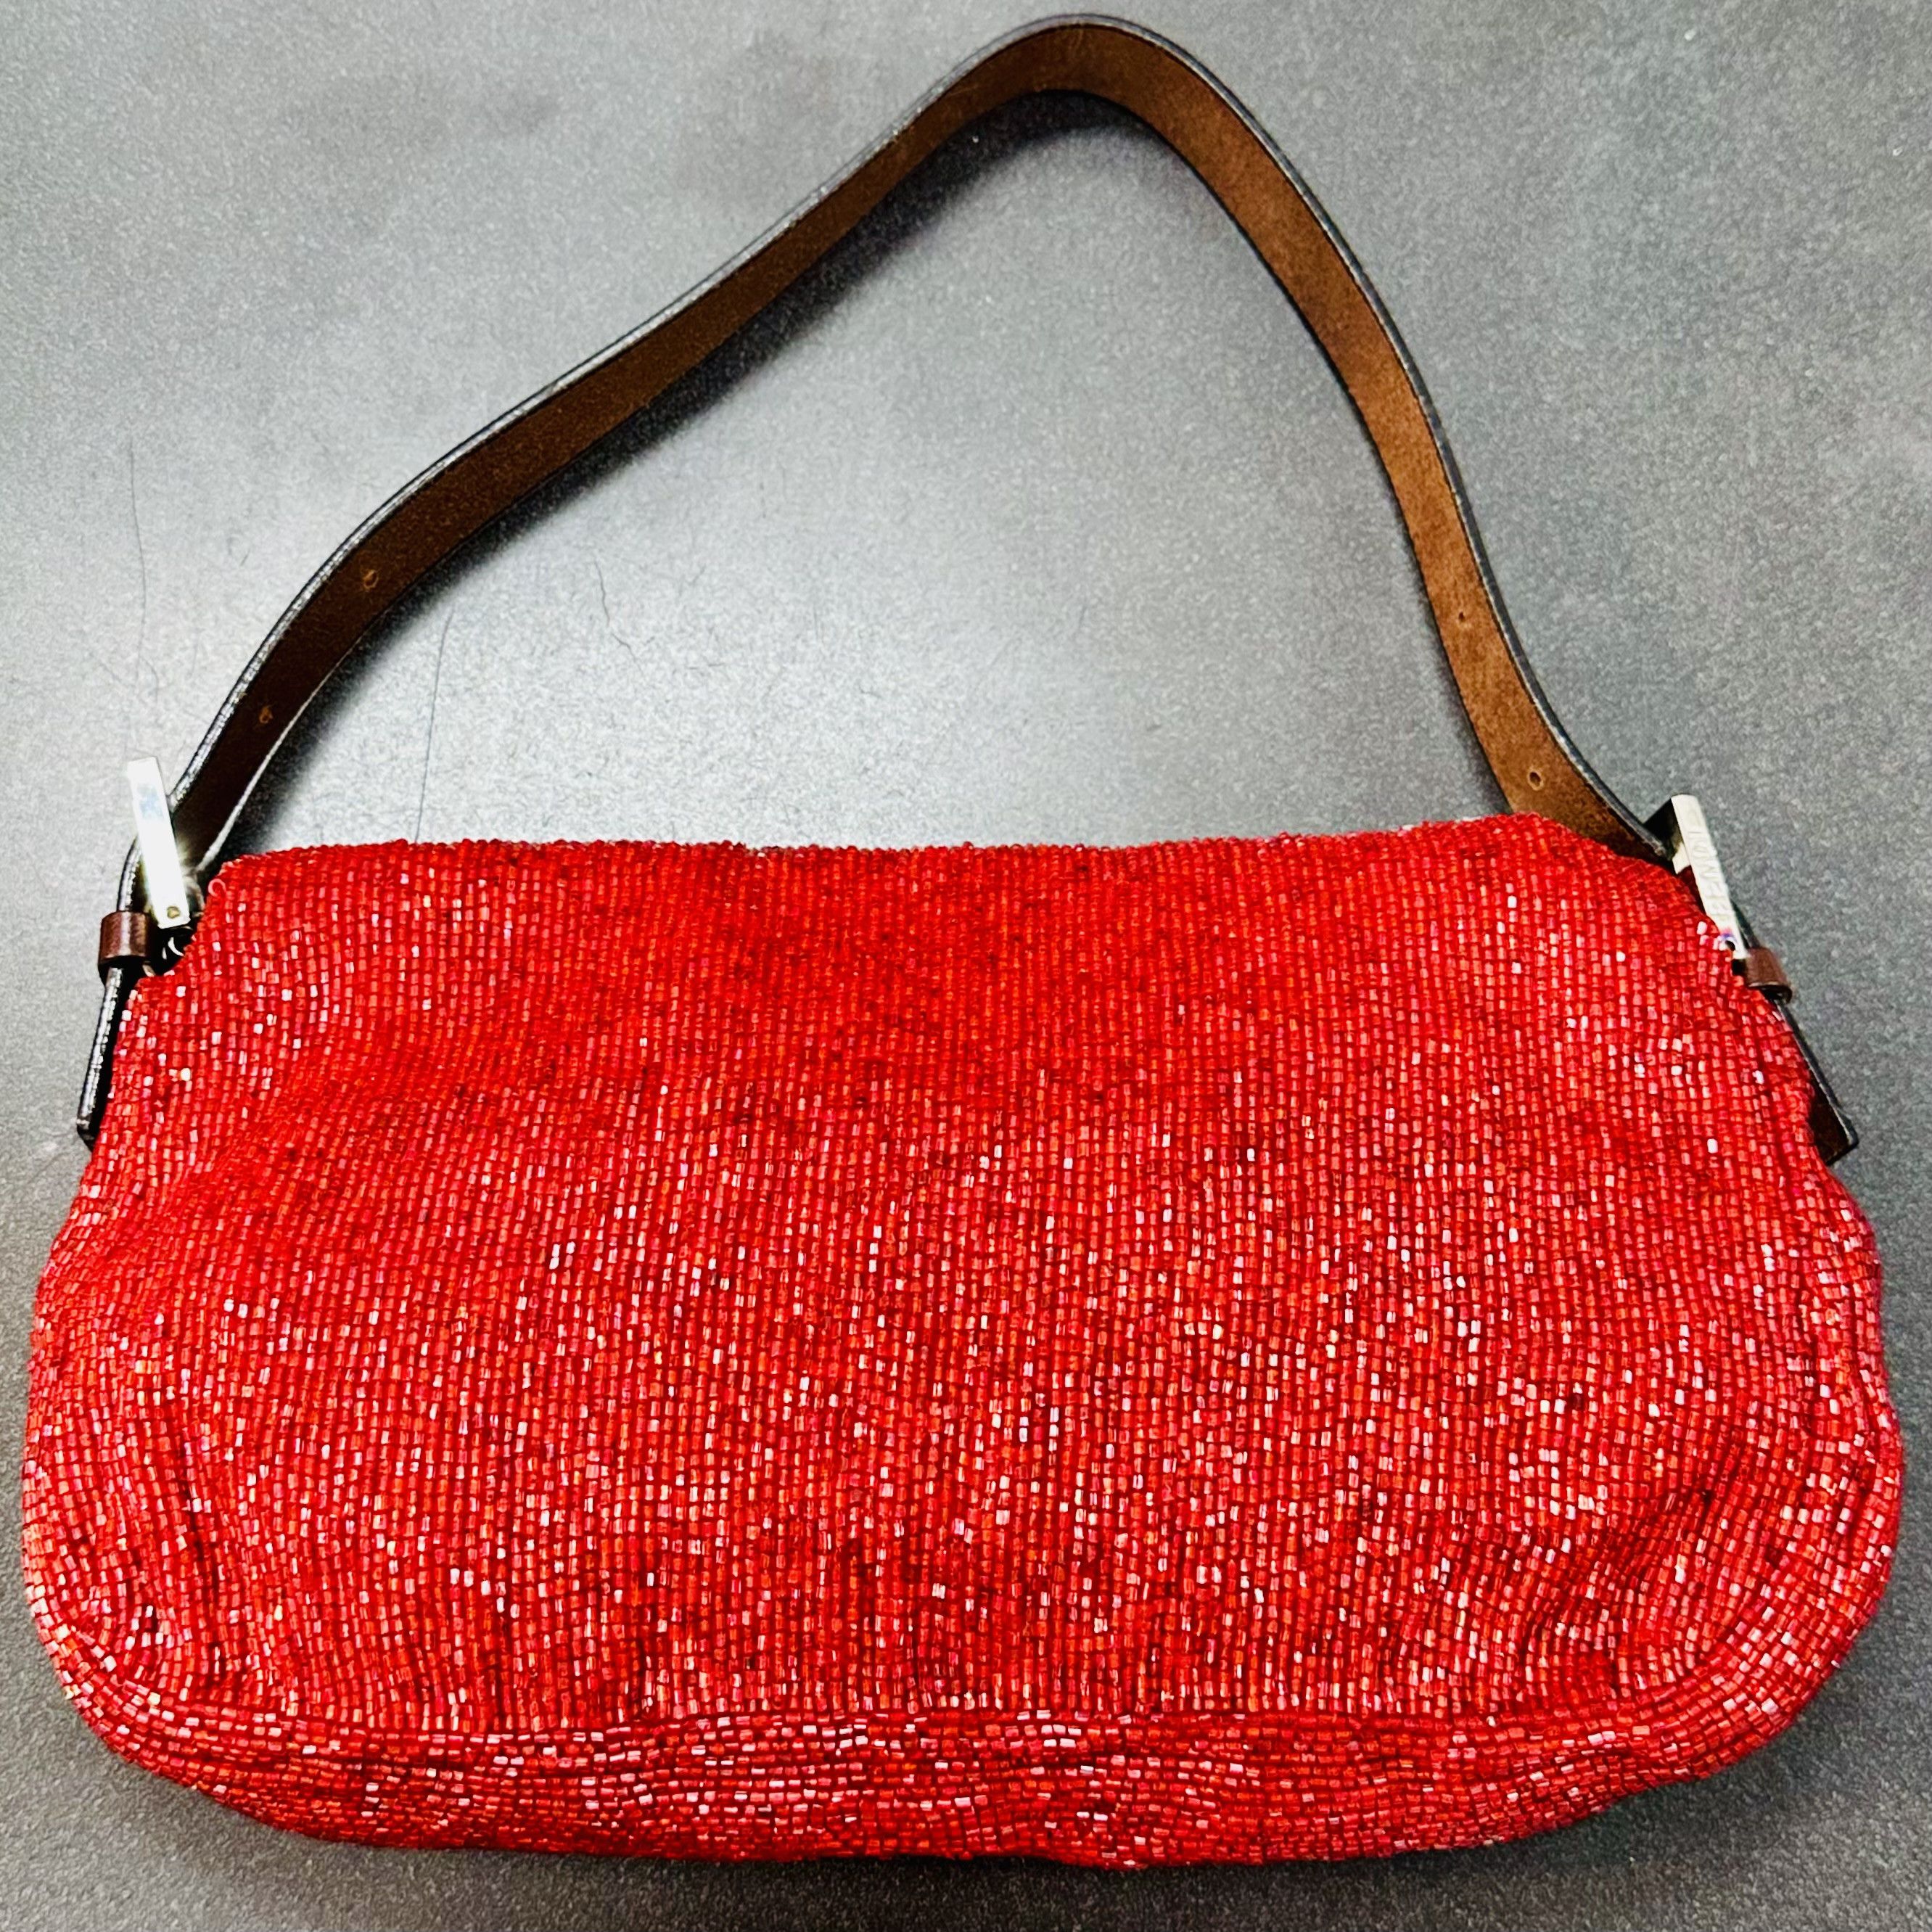 Fendi Fendi Rare Limited Edition Red Beaded Brown Leather Baguette Size ONE SIZE - 8 Thumbnail